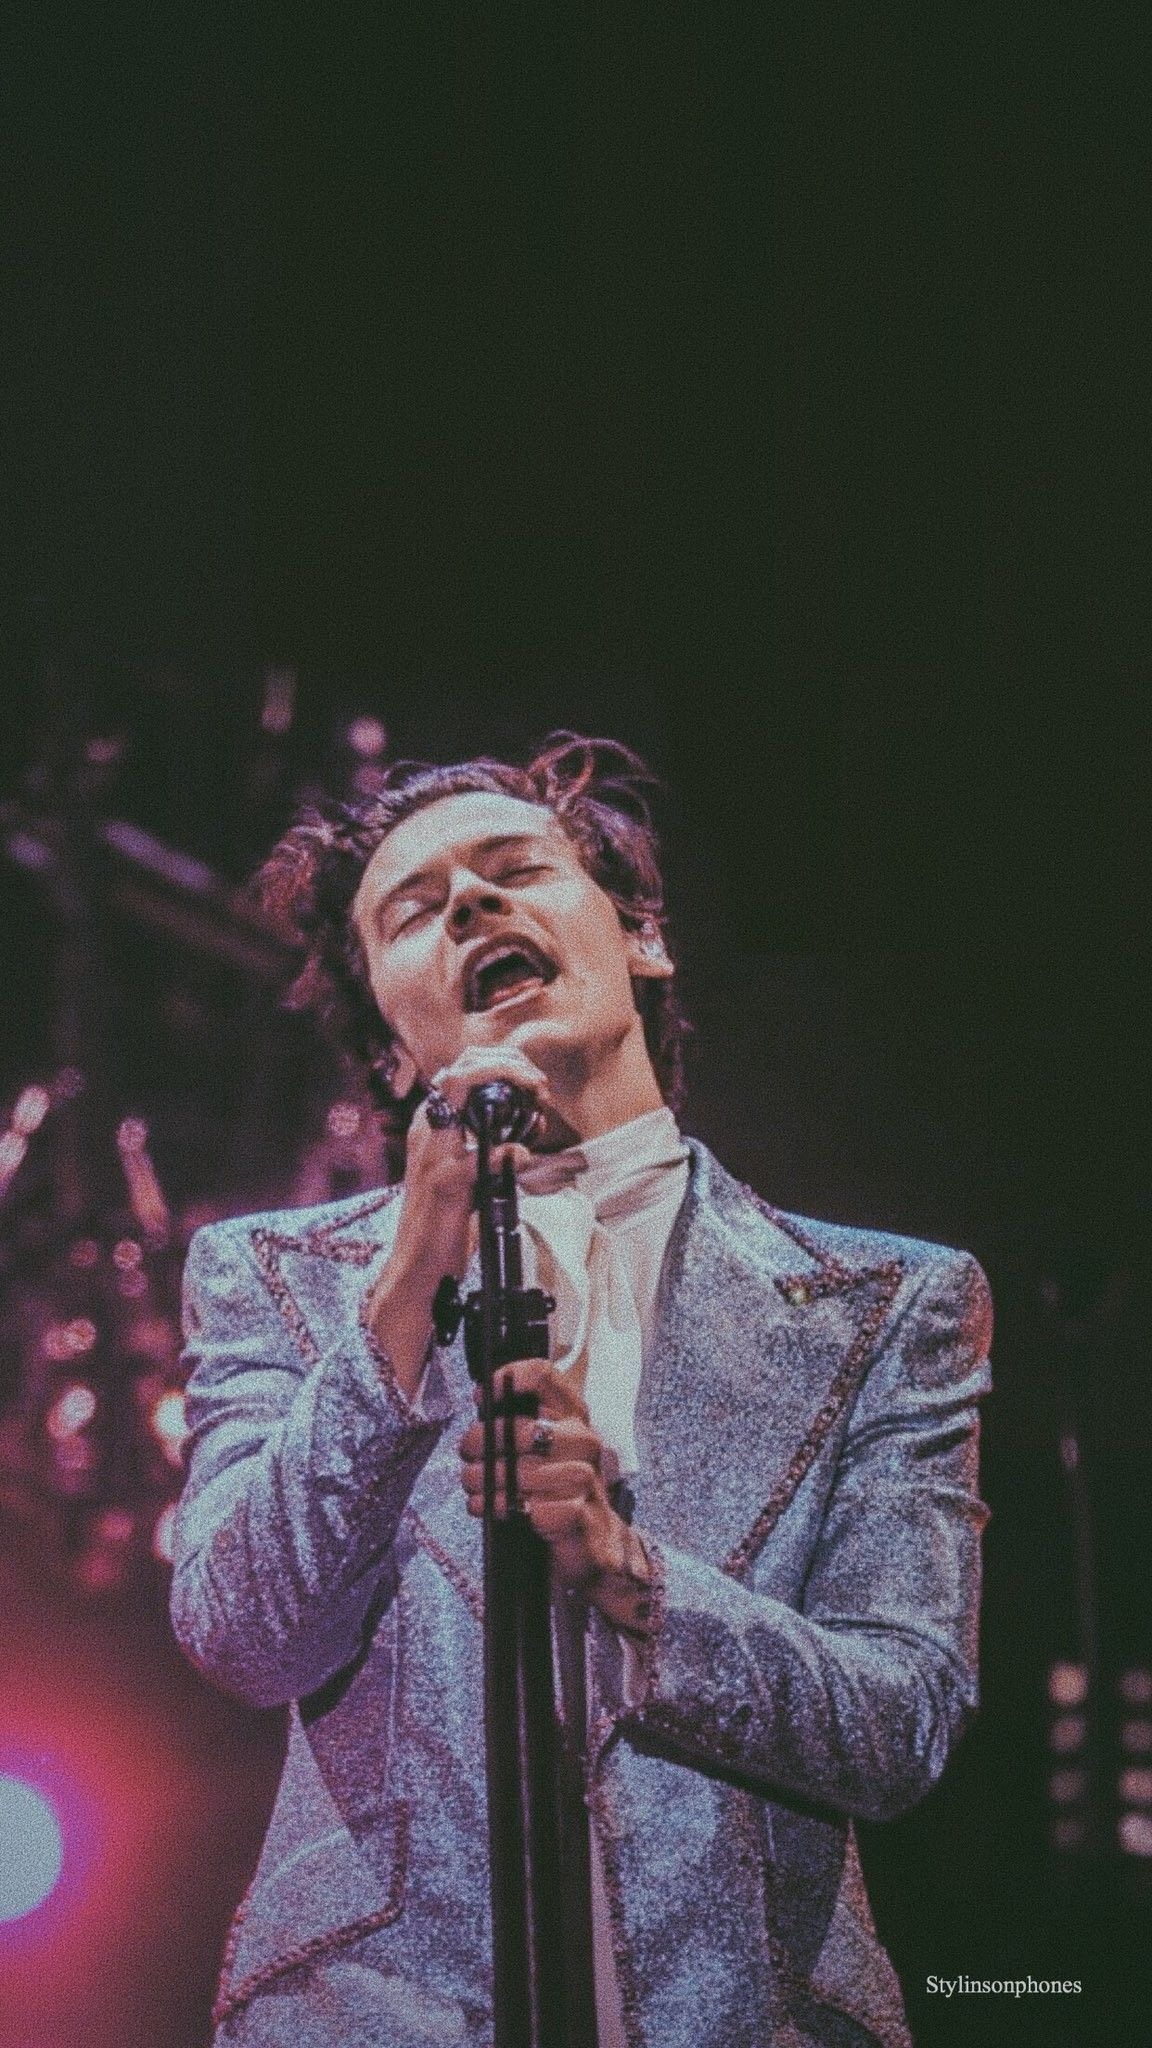 Harry Styles singing on stage in a silver suit - Harry Styles